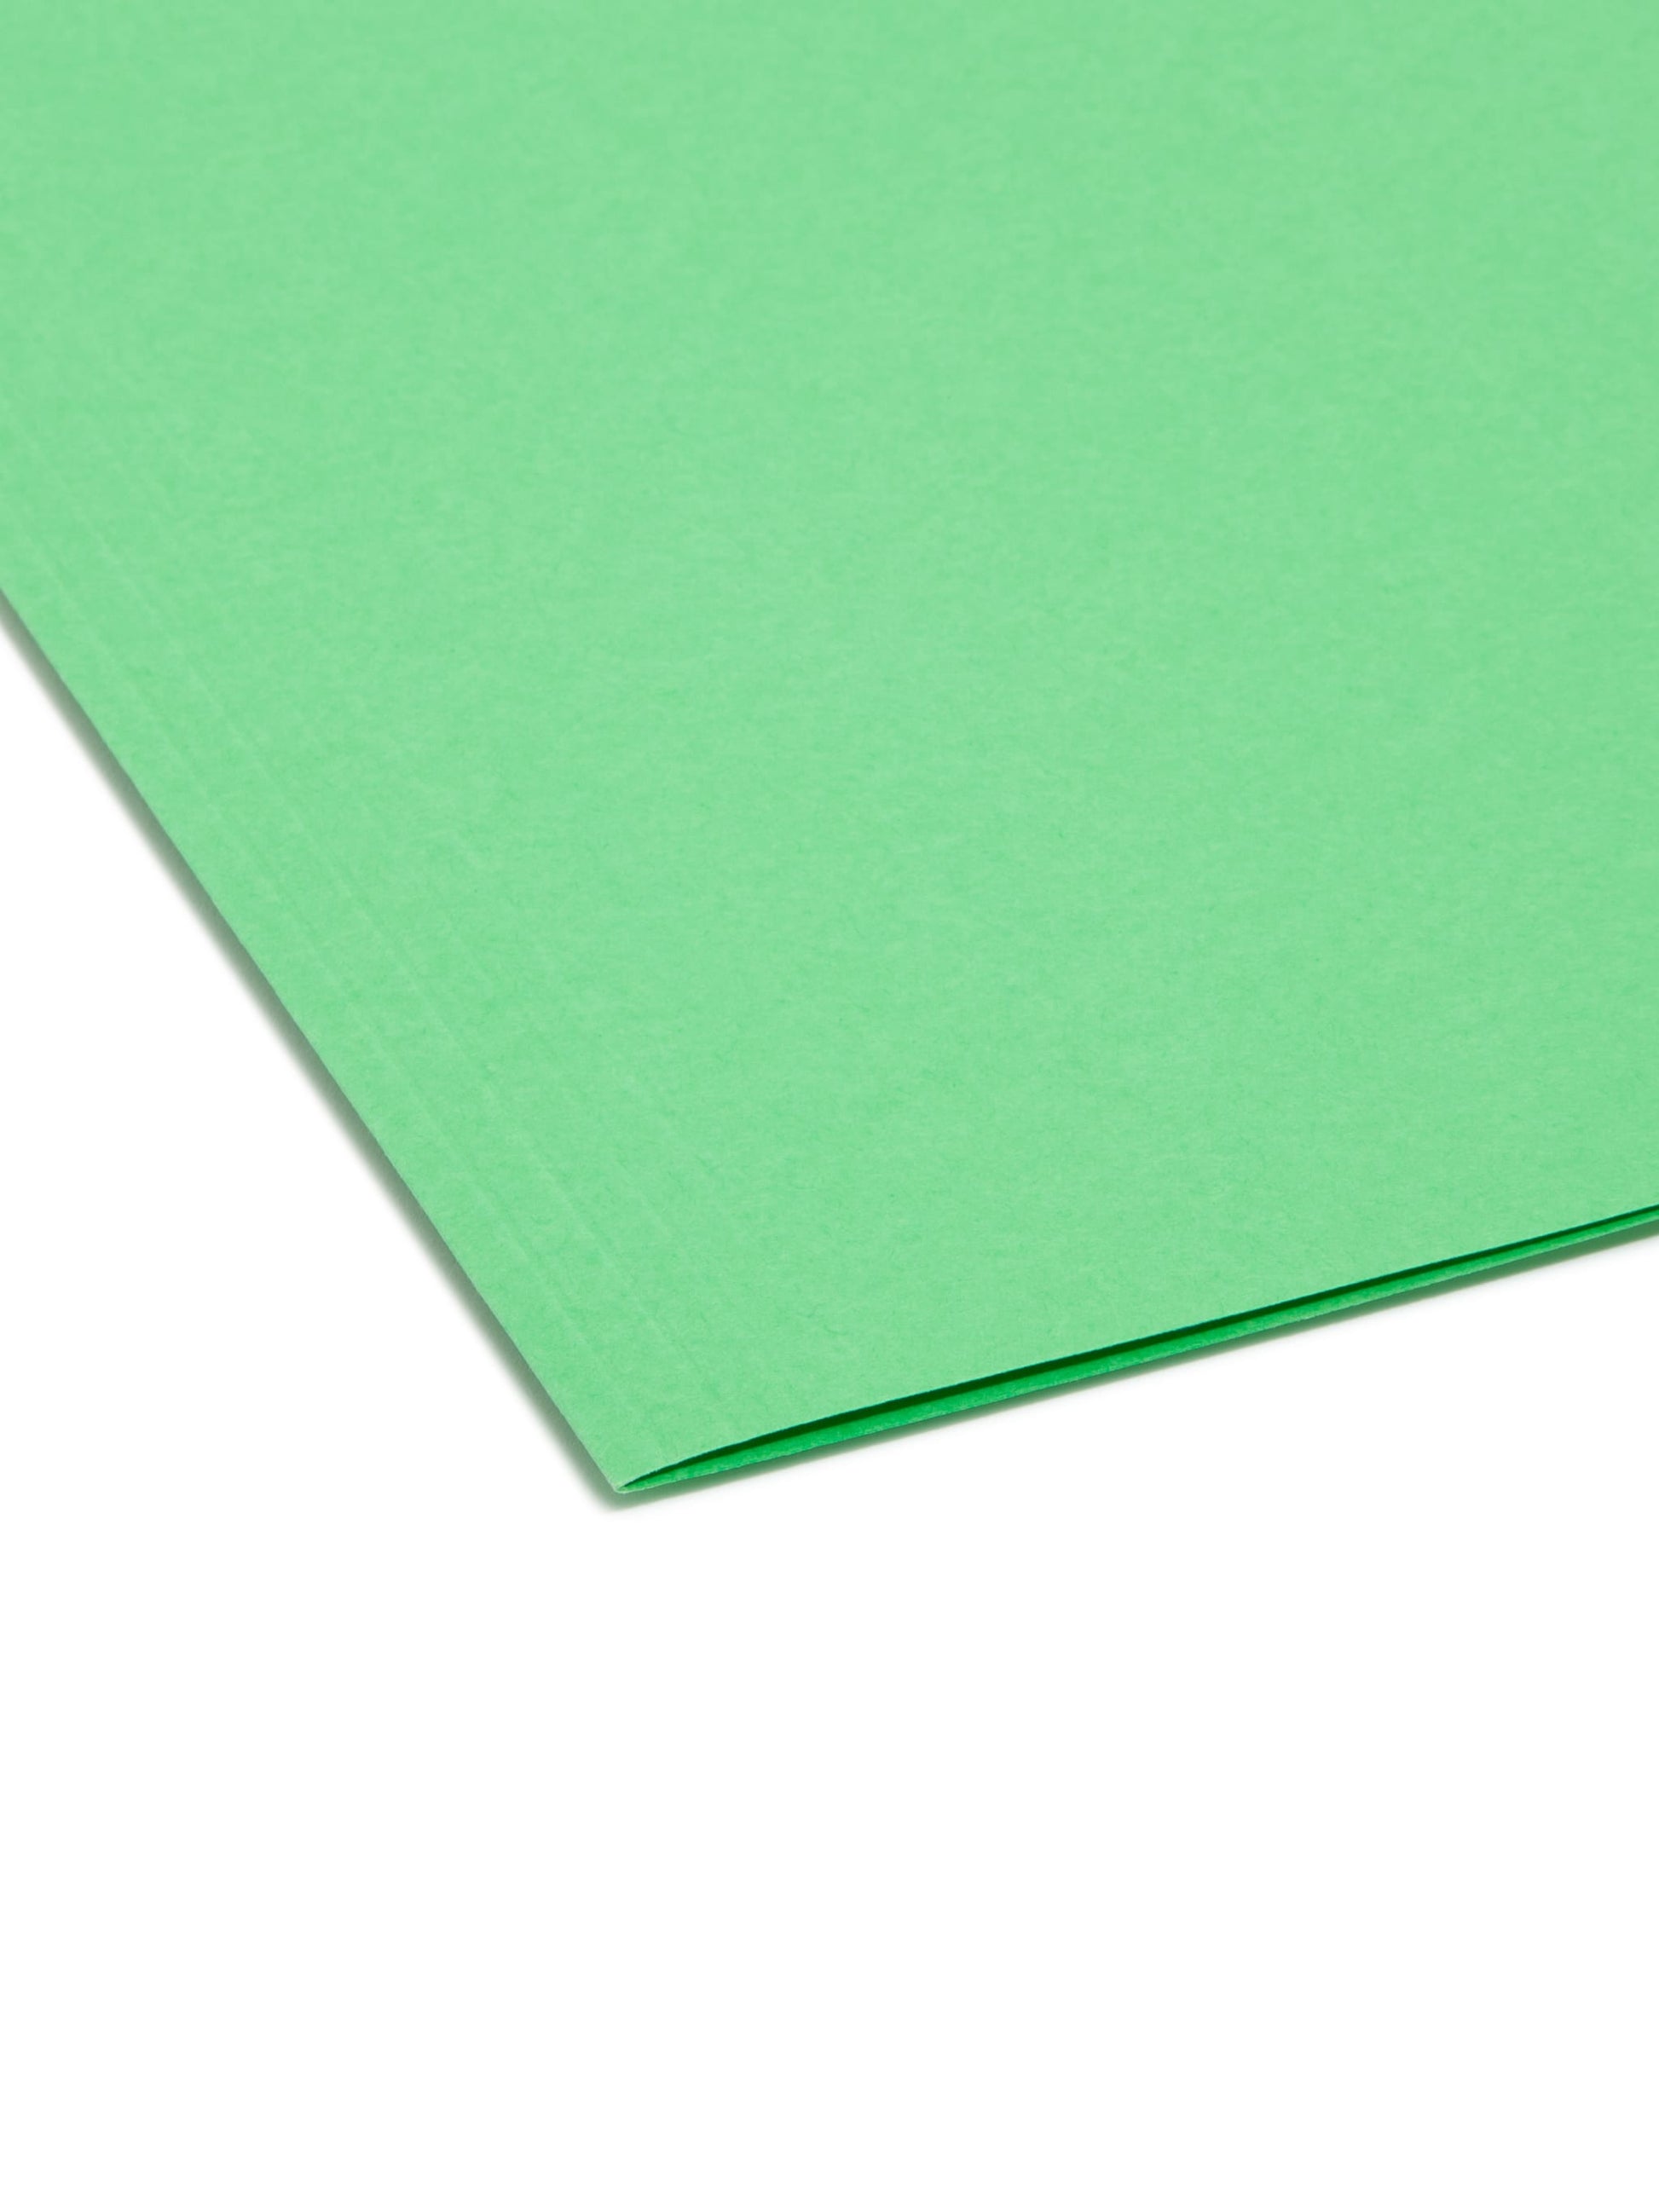 Standard Hanging File Folders with 1/3-Cut Tabs, Green Color, Letter Size, Set of 25, 086486640220